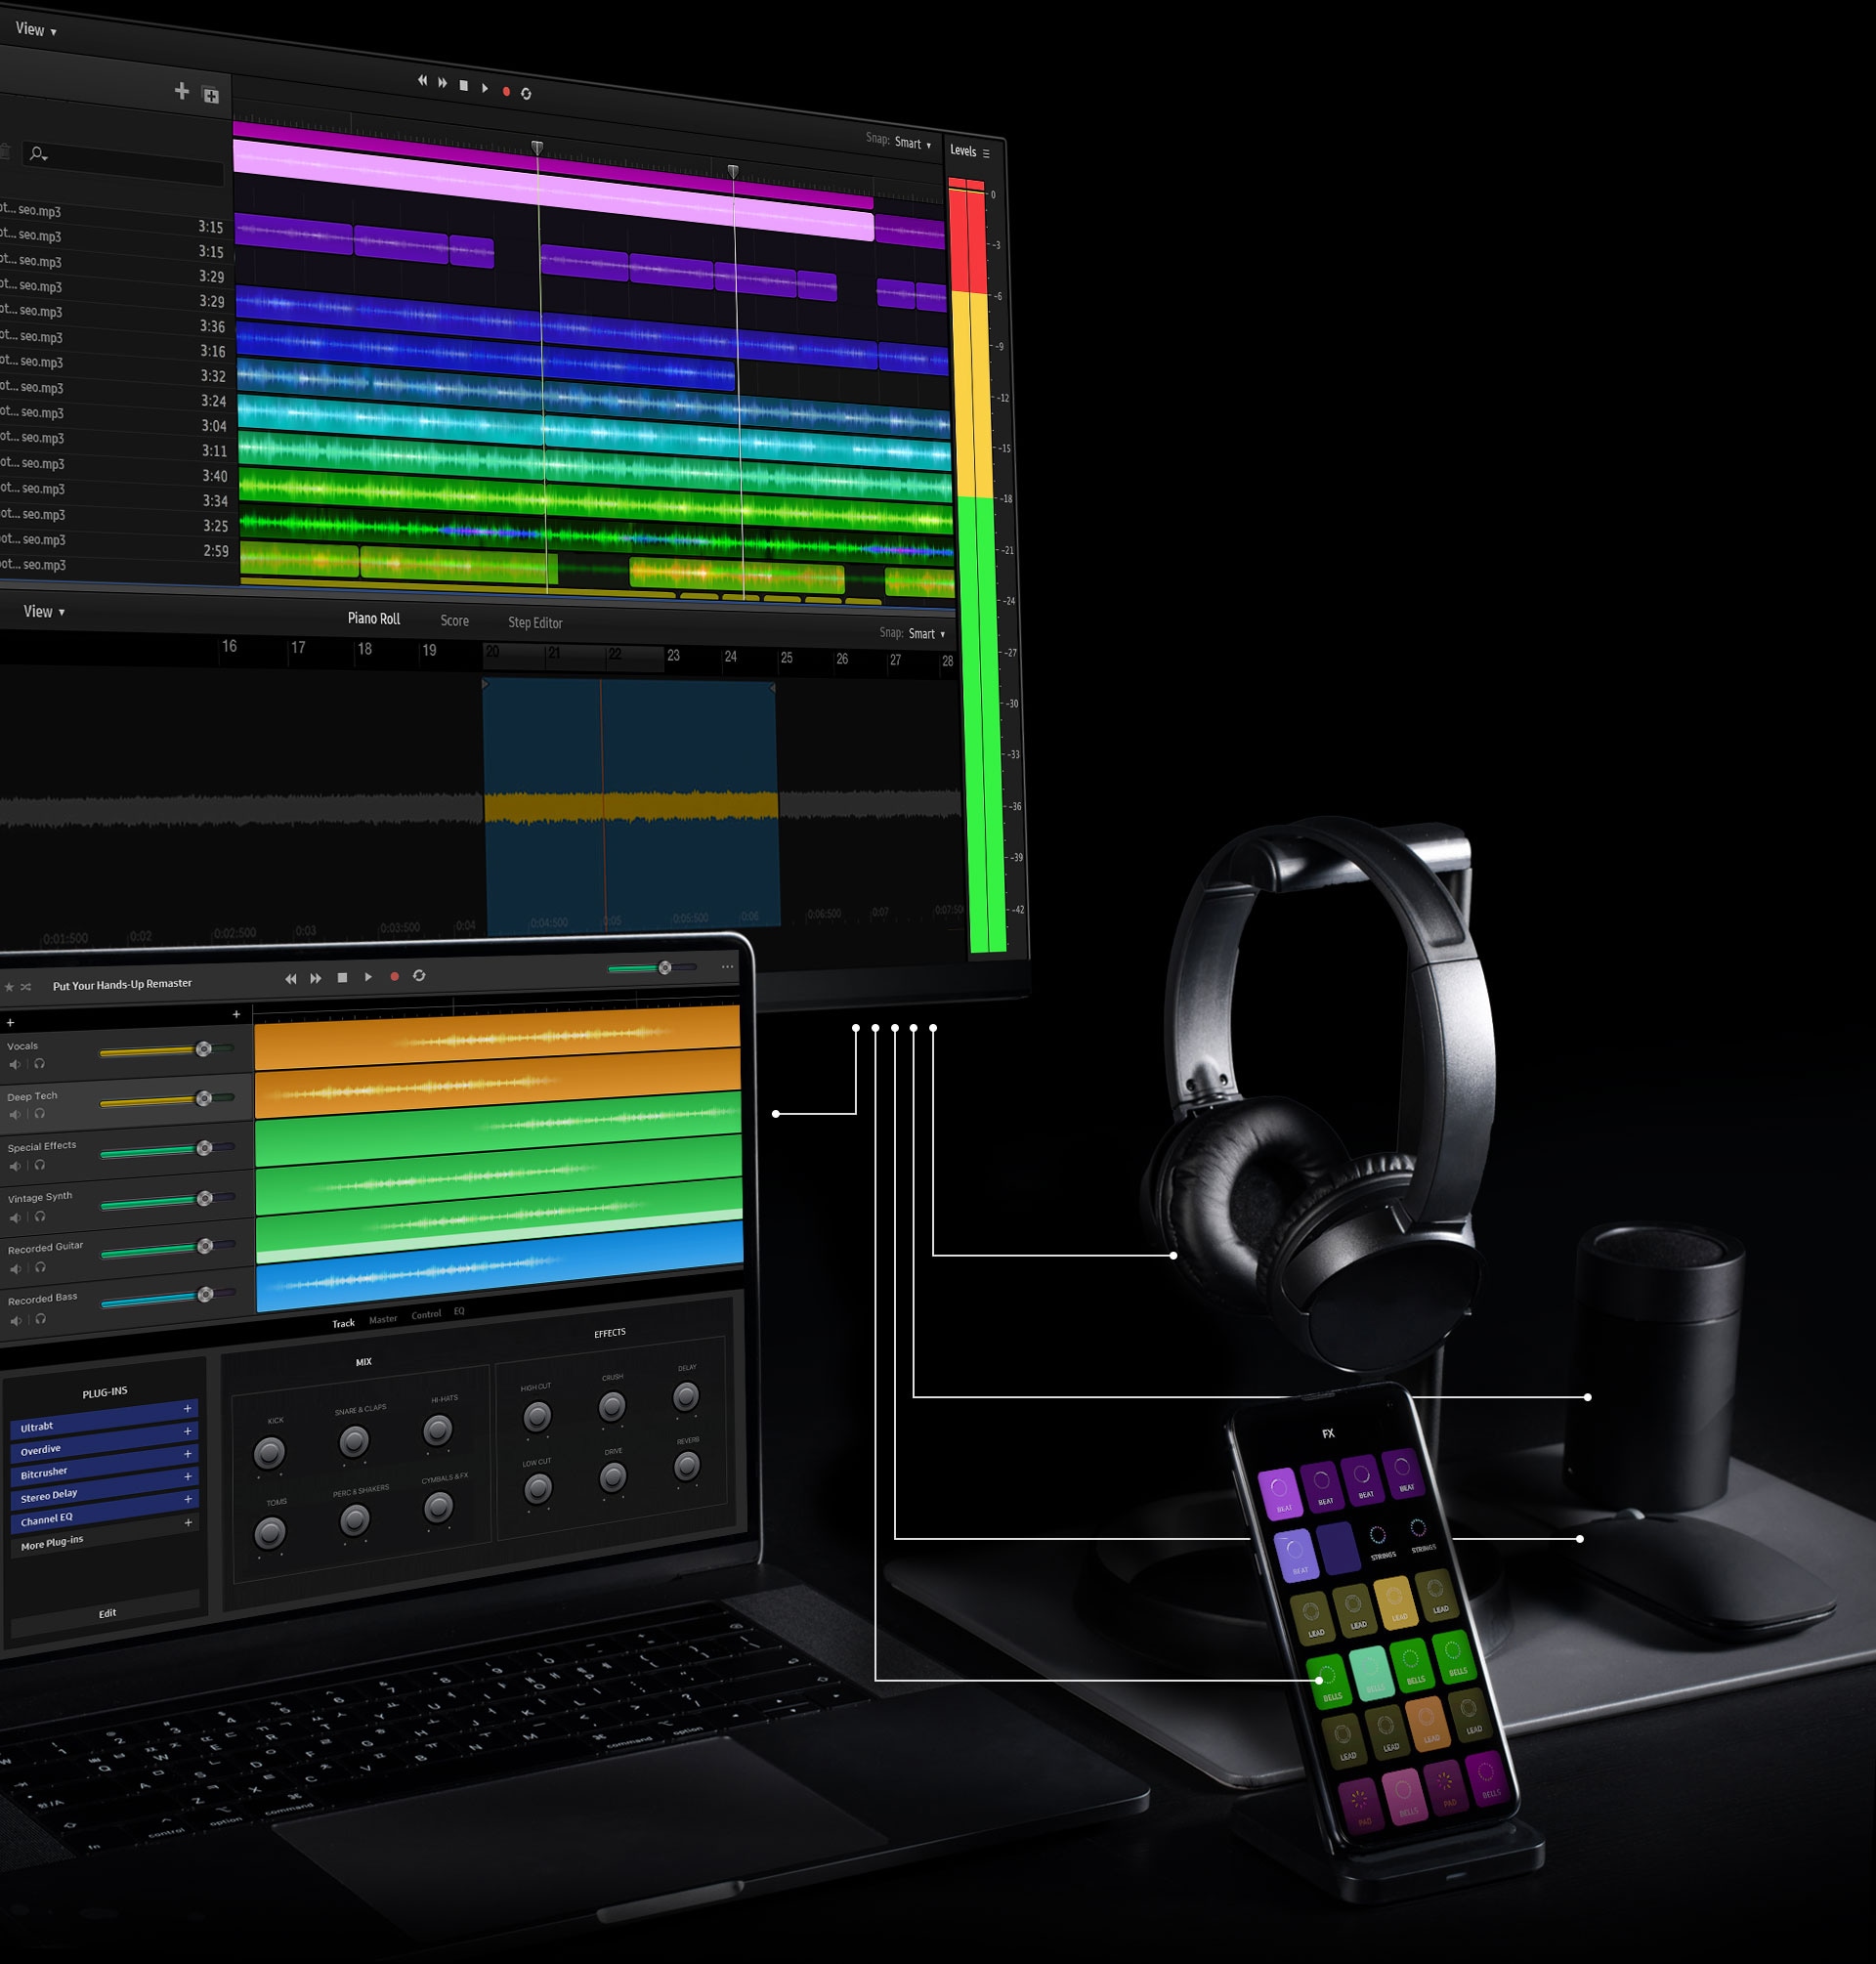 A full docking workspace setup includes monitor, laptop, mobile device, headphones, mouse and speaker. White lines show how the devices can all connect together via the monitor. On the screen of the monitor is music editing software, showing multiple layers of a music track in green, blue, pink and purple colors. On the screen of the laptop, which is placed just below the monitor, shows a different music editing software. This shows additional music track layers in blue, green and orange colors. The mobile device, placed to the right of the monitor and laptop, shows multiple filter options in purple, khaki green, beige and brown colors.